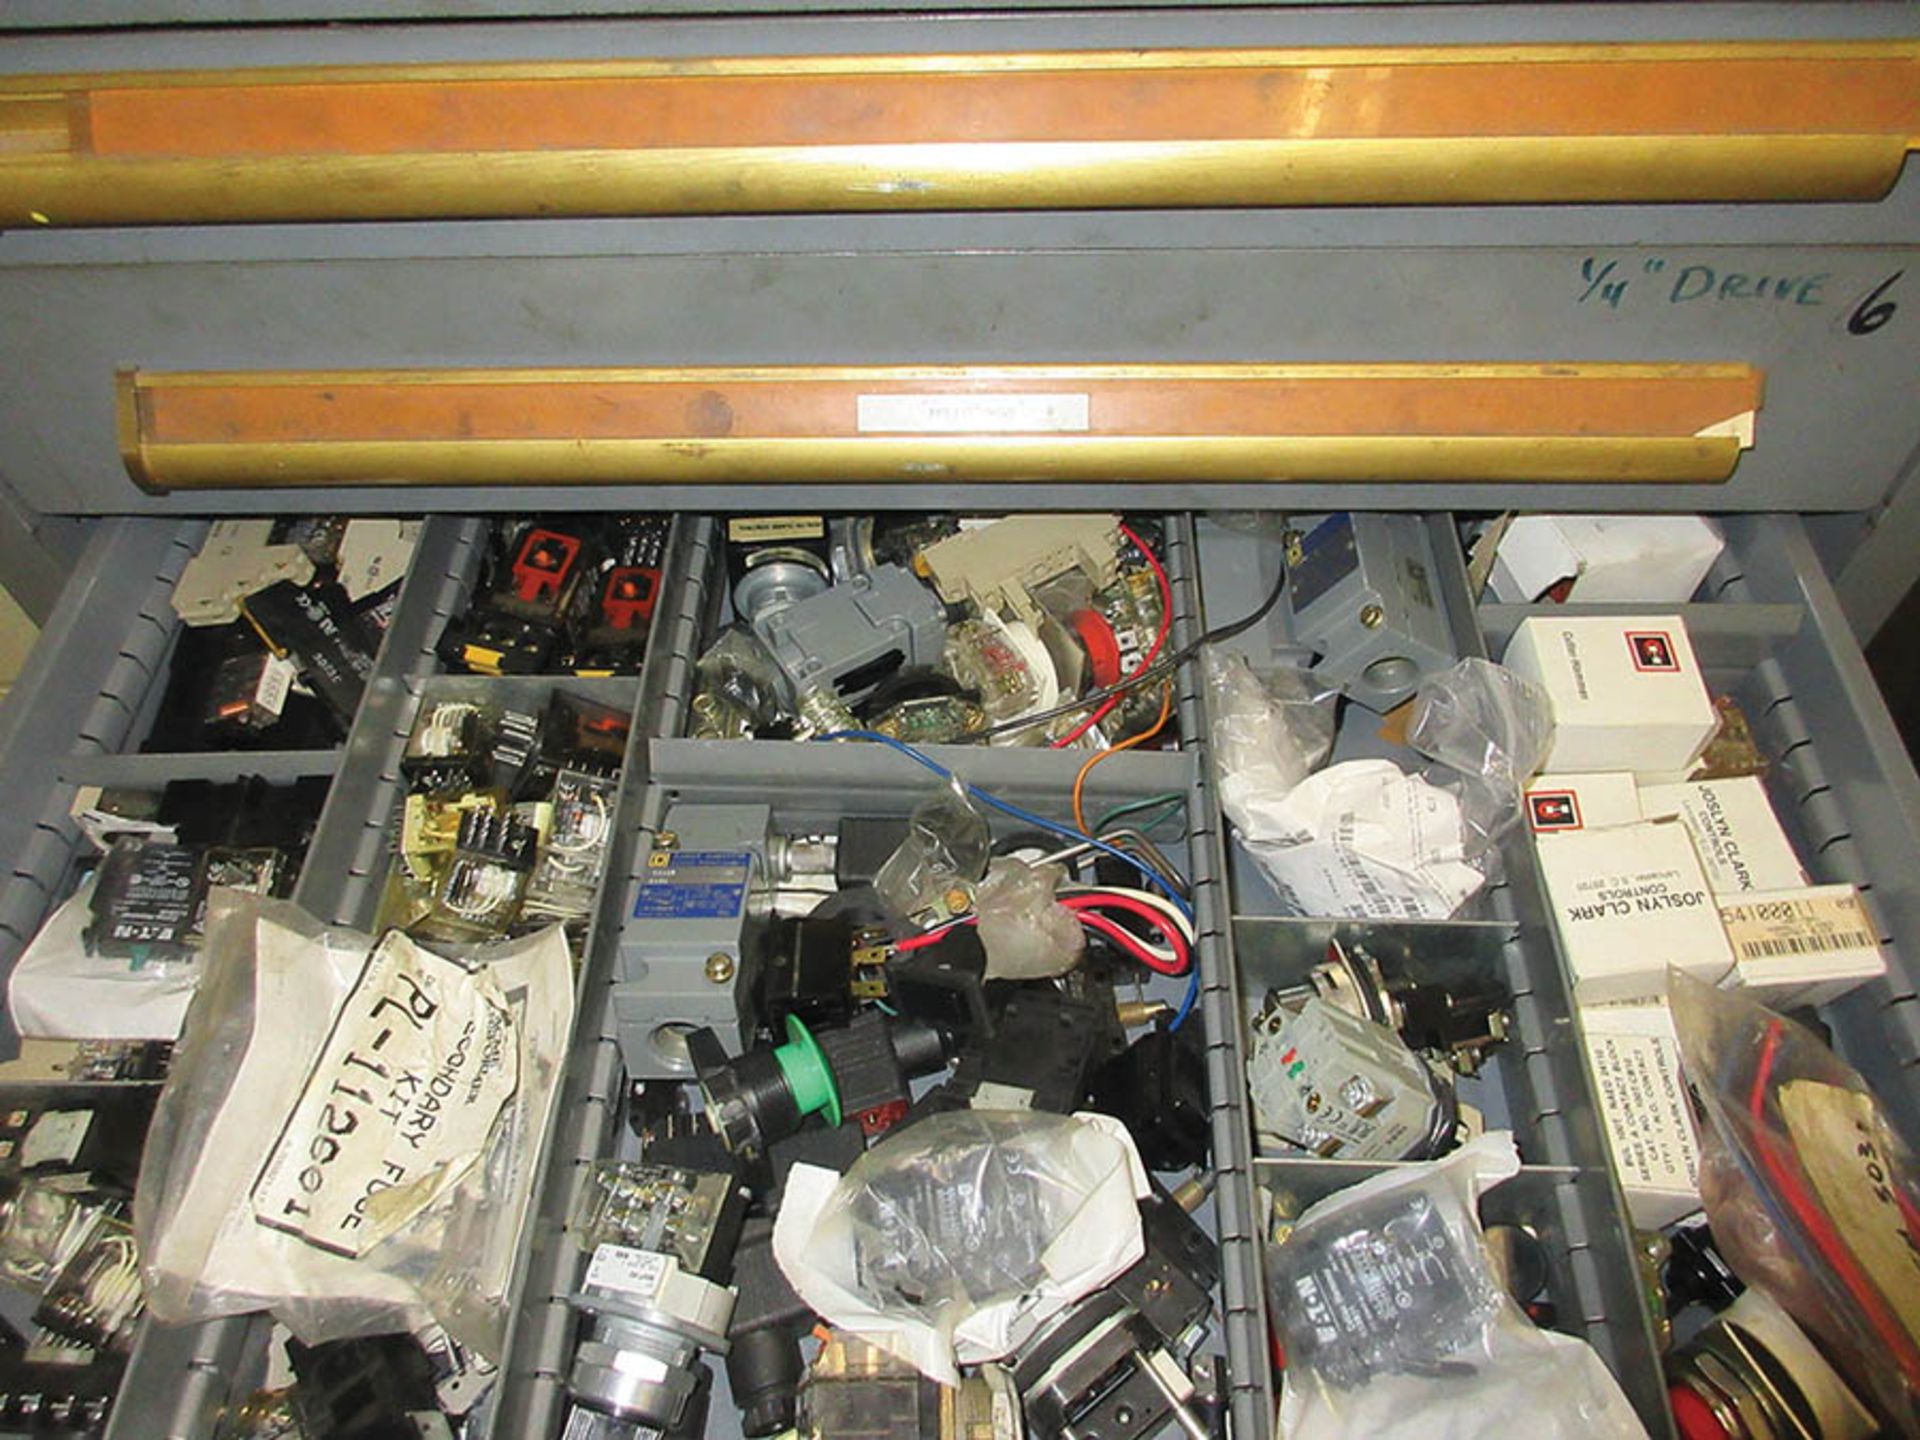 EQUIPTO 13-DRAWER CABINET W/ CONTENTS OF RELAYS, SWITCHES, CONNECTORS, AIR FITTINGS & MORE - Image 2 of 5